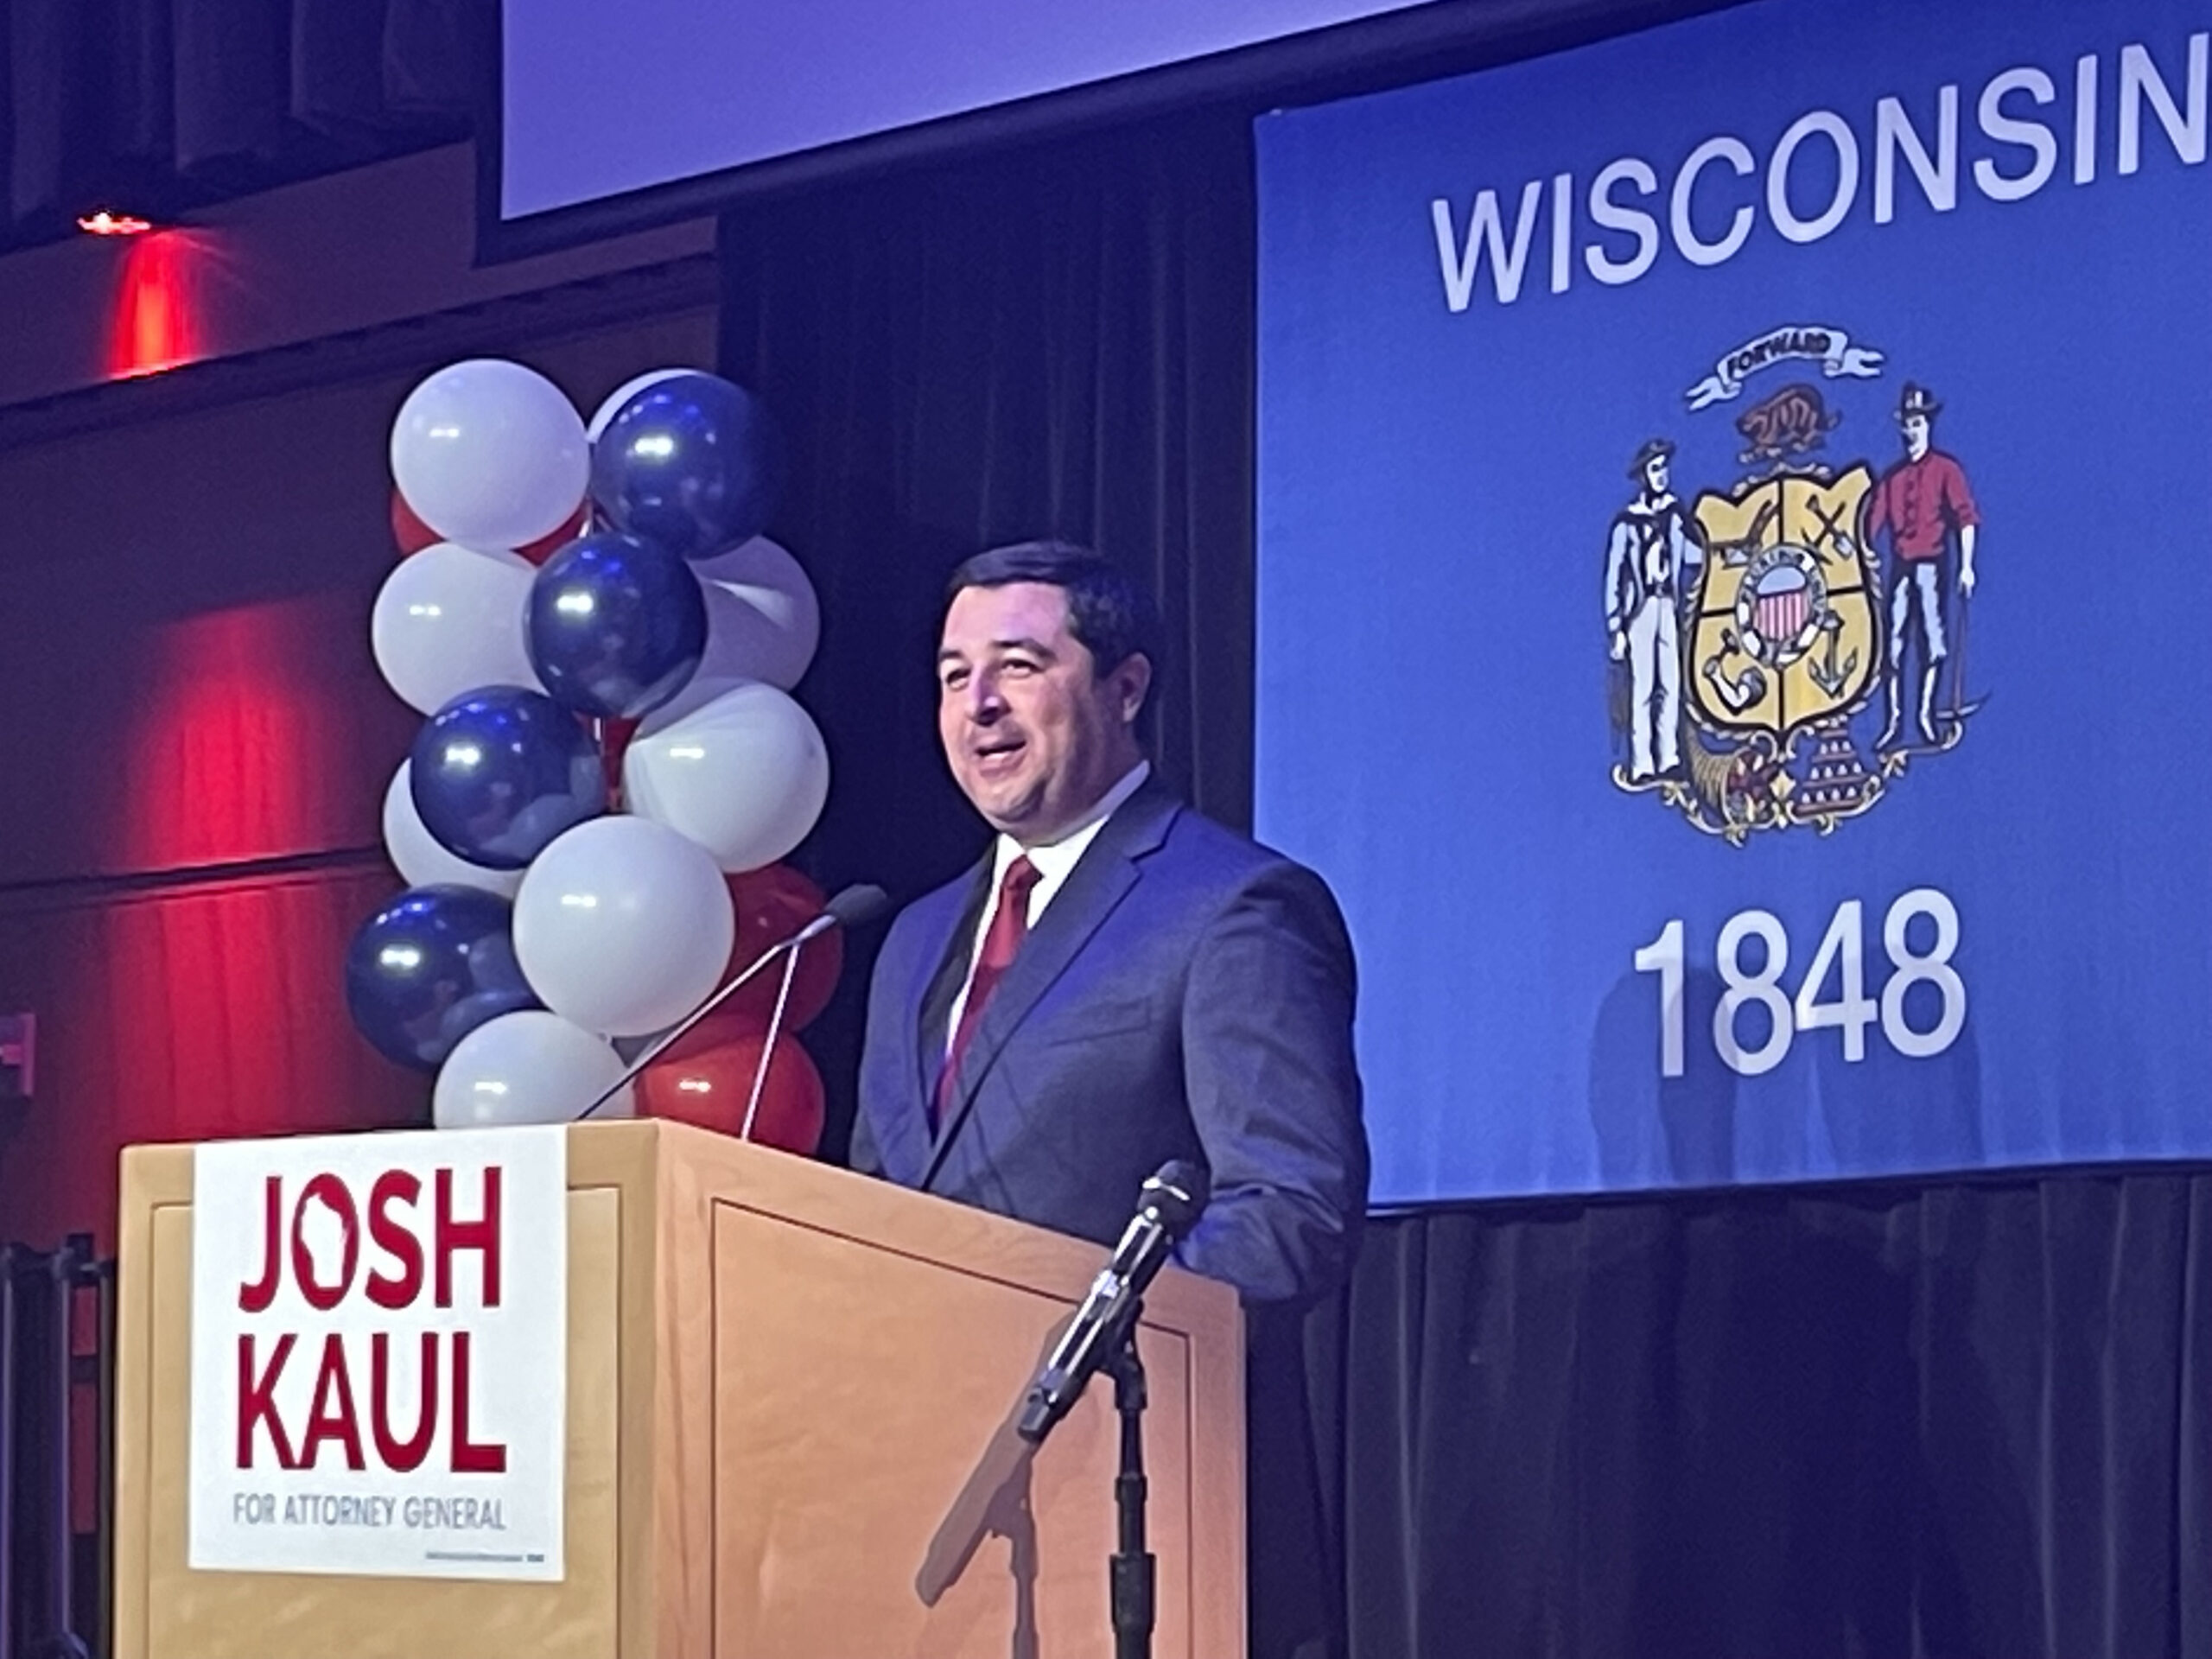 Josh Kaul addresses a crowd on the night of the midterm election, Nov. 8, 2022